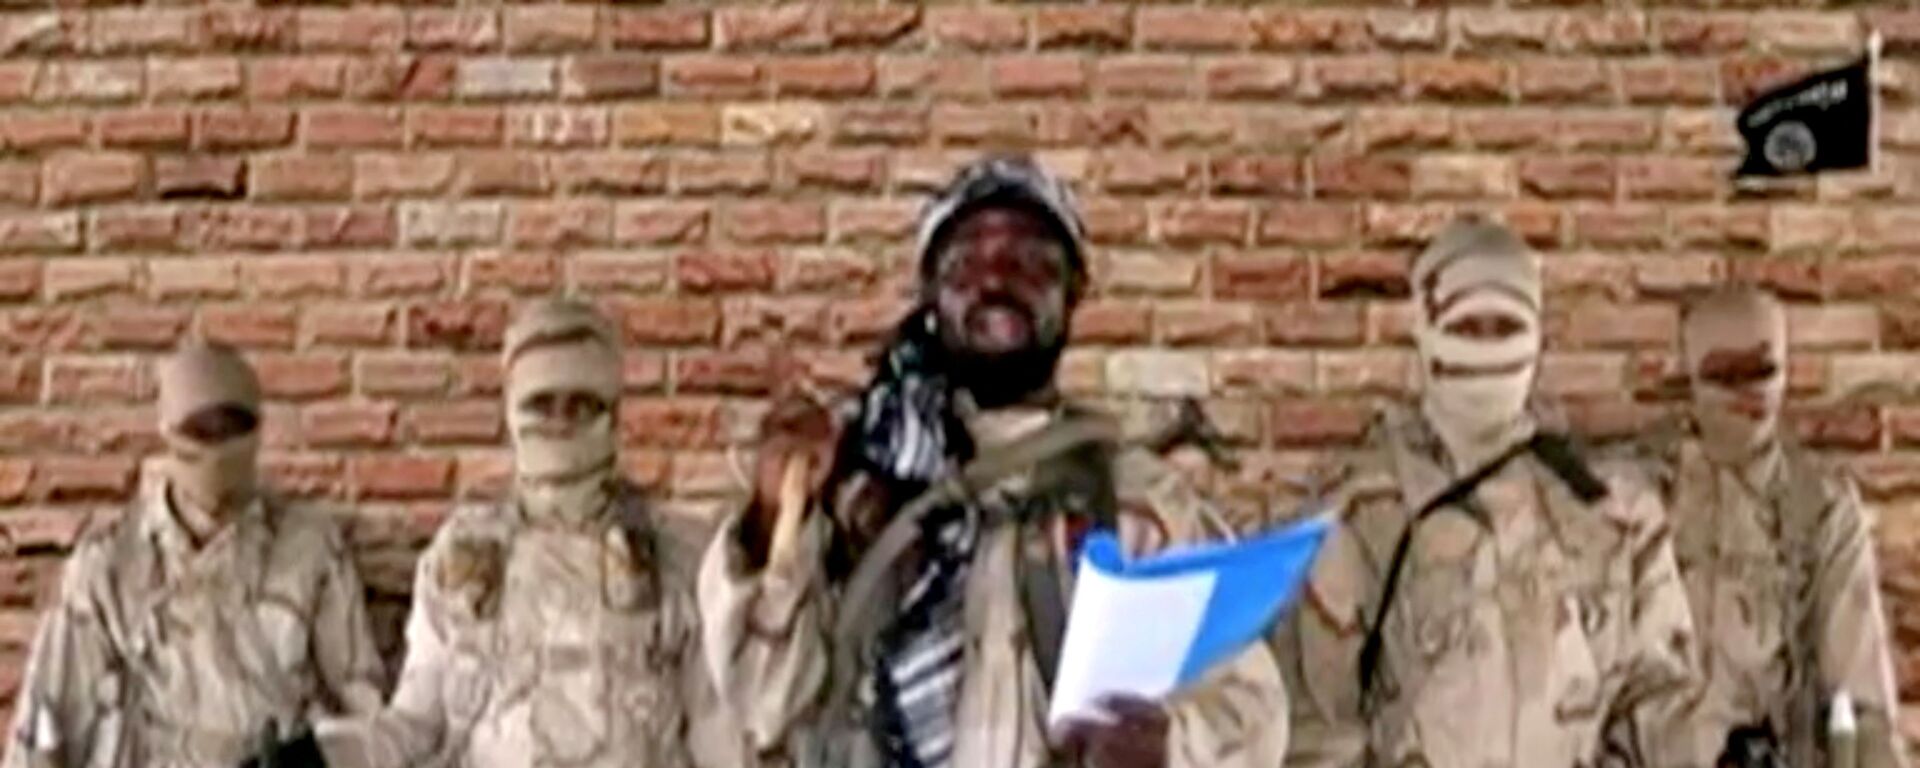 Boko Haram leader Abubakar Shekau speaks in front of guards in an unknown location in Nigeria in this still image taken from an undated video obtained on January 15, 2018. - Sputnik International, 1920, 06.06.2021